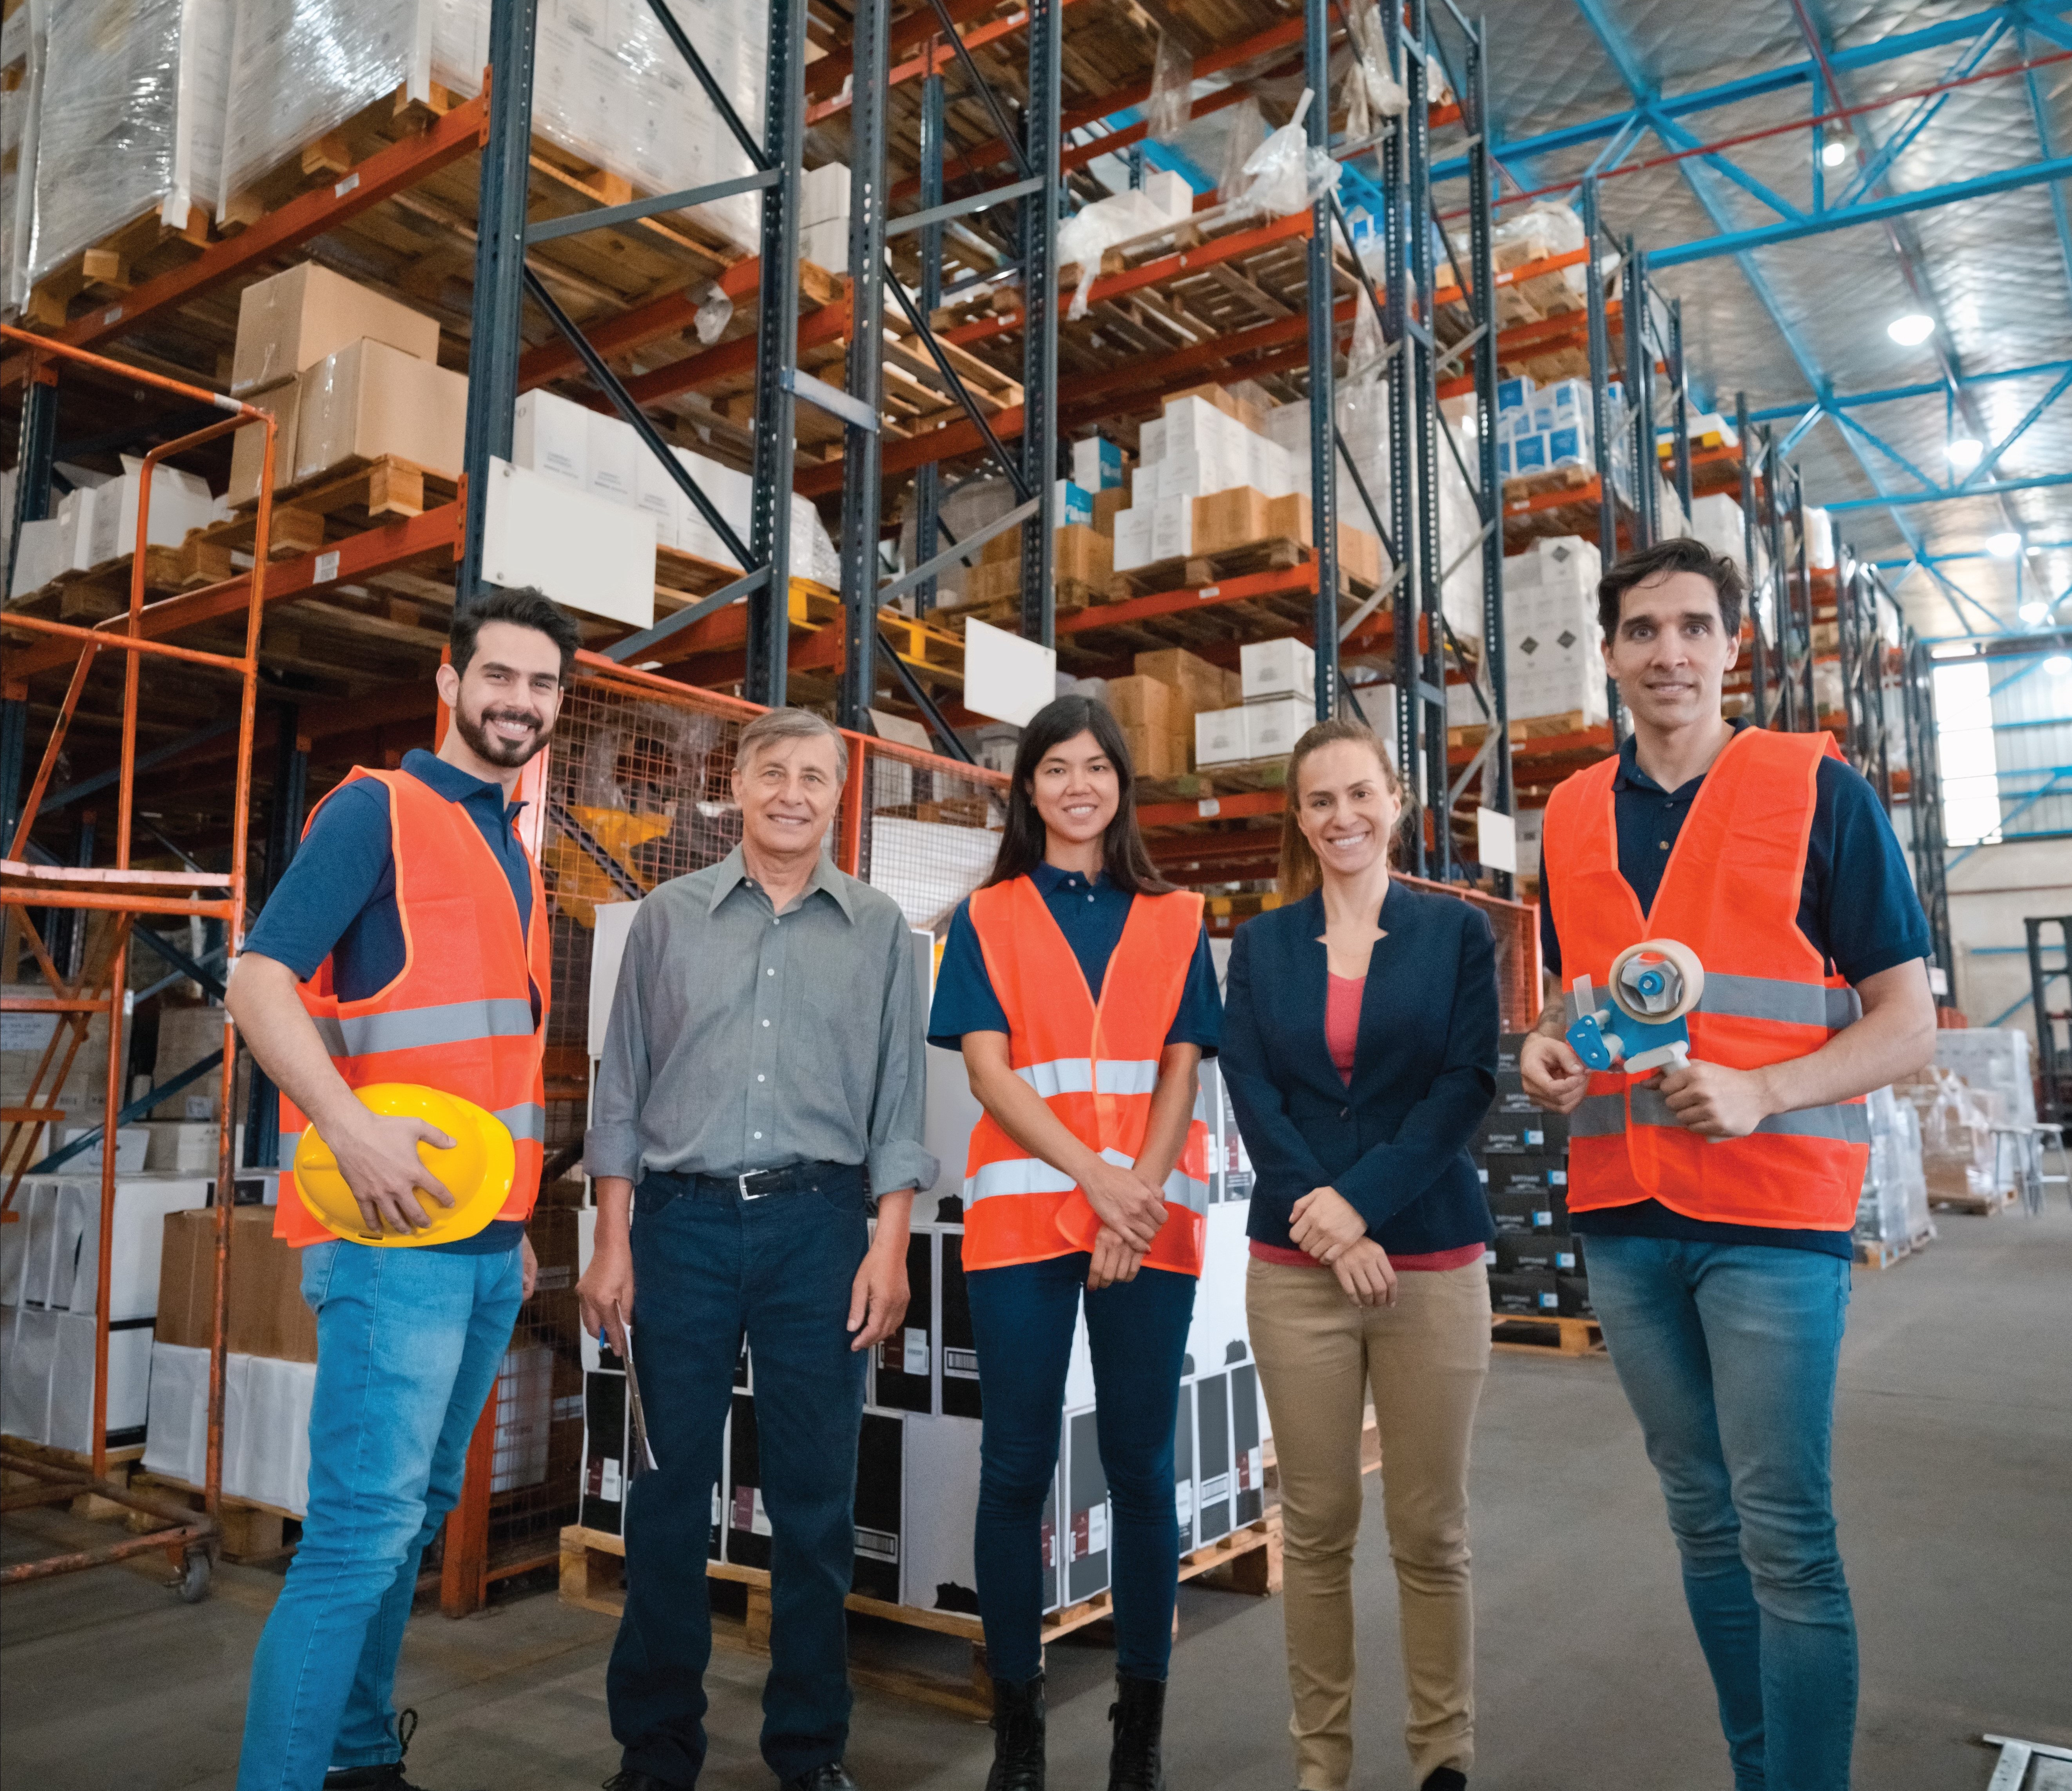 Image: 6 individuals standing in warehouse.